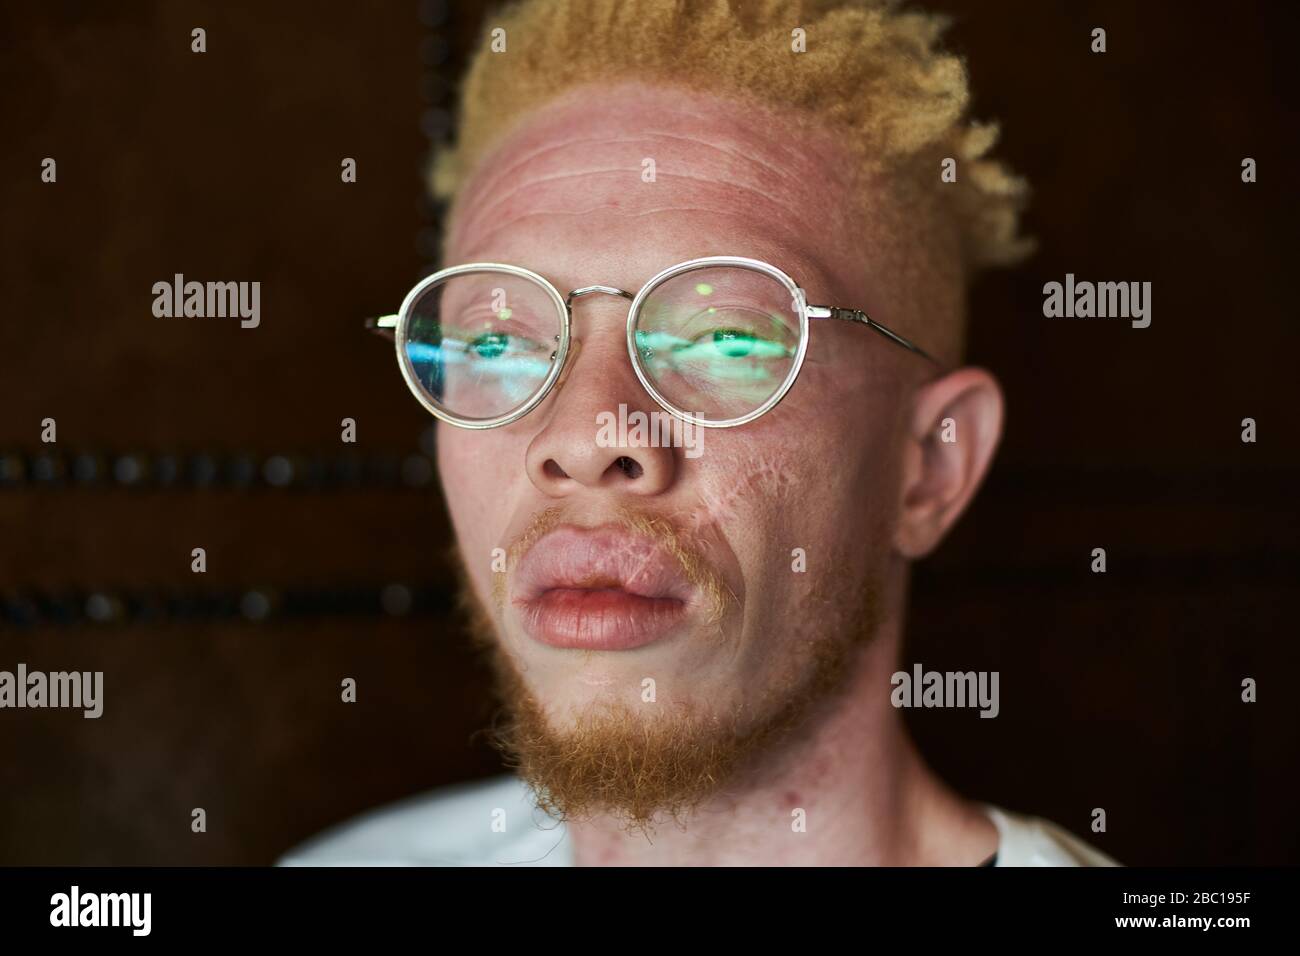 Portrait of an albino man with round glasses Stock Photo